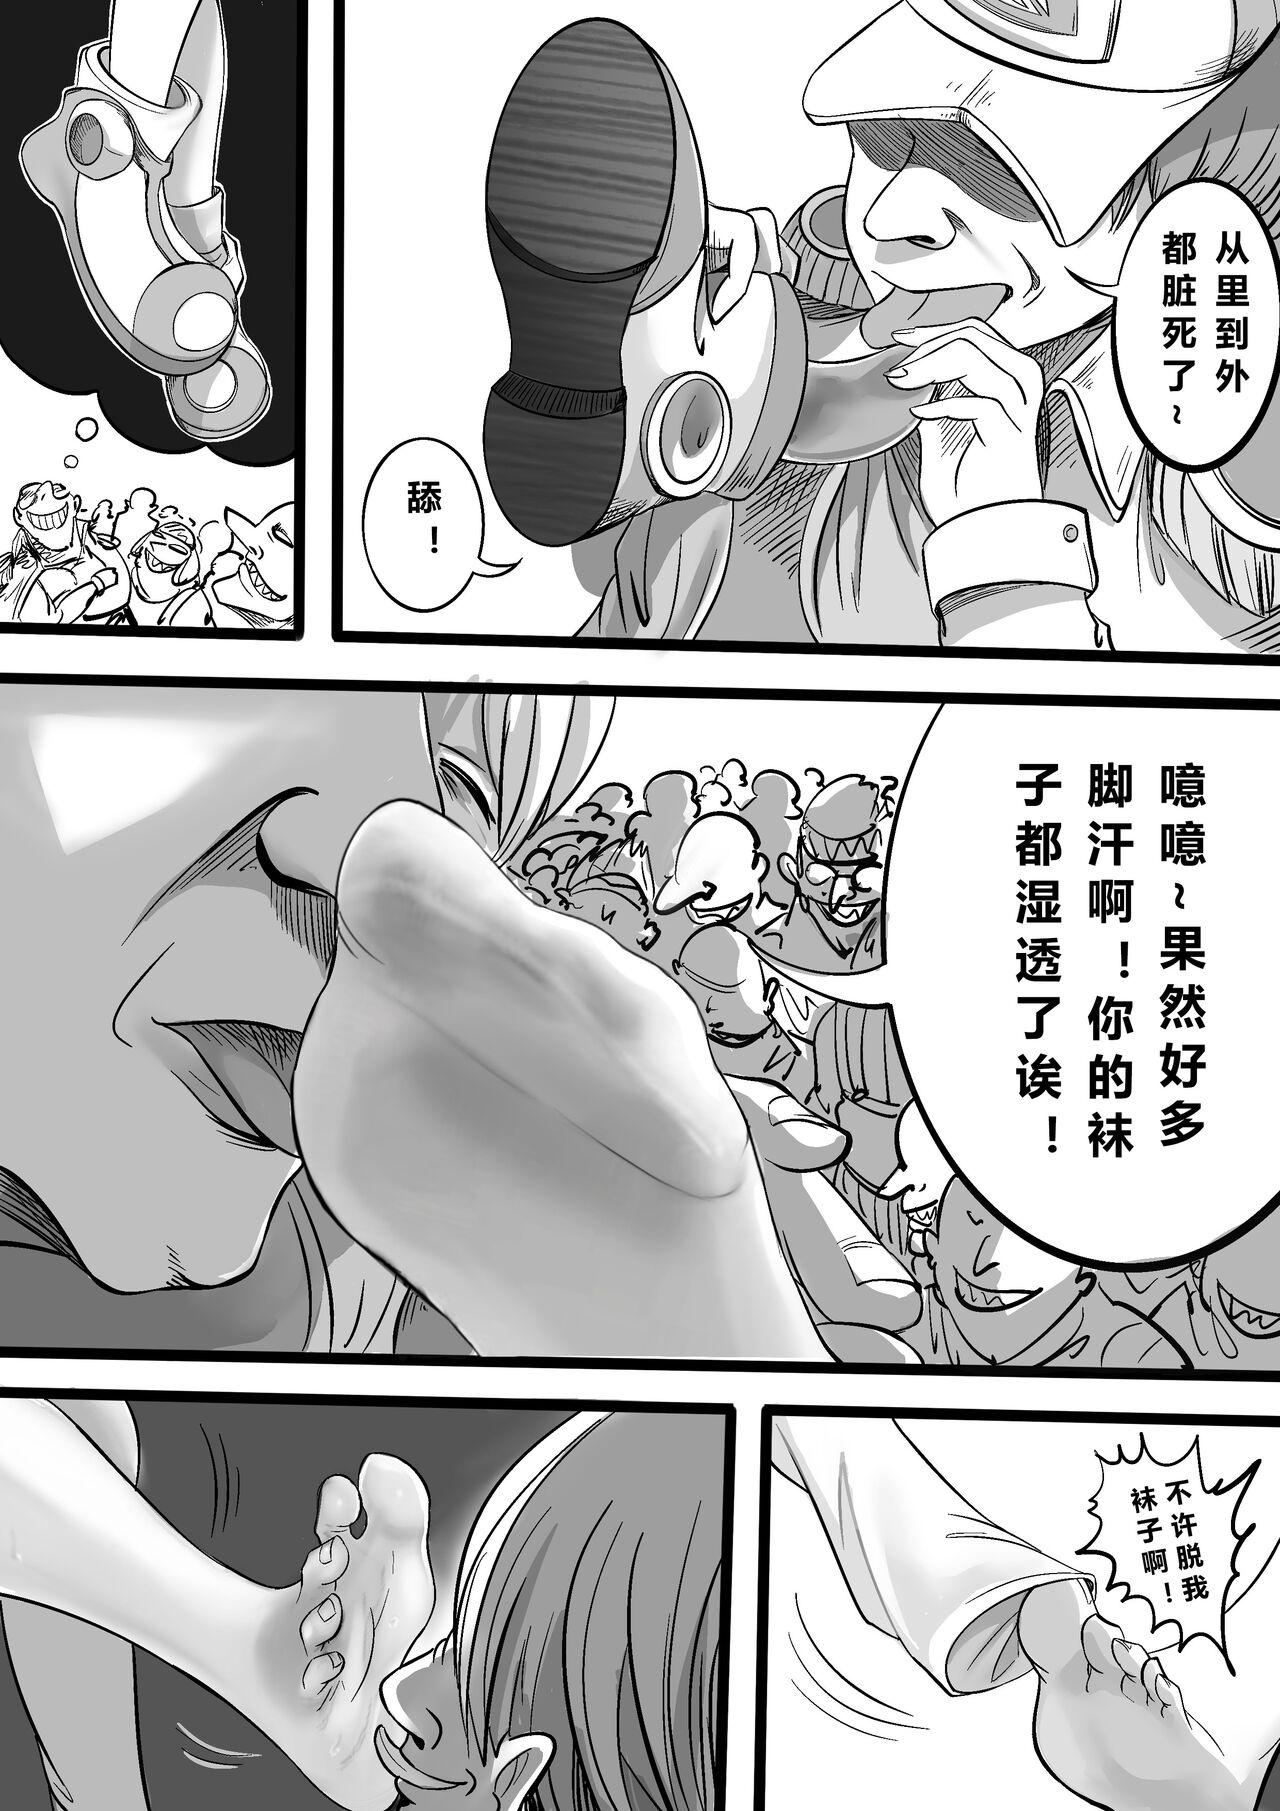 Arabe ONE PIECE 歌之魔女的监禁篇 - One piece Dominicana - Page 5